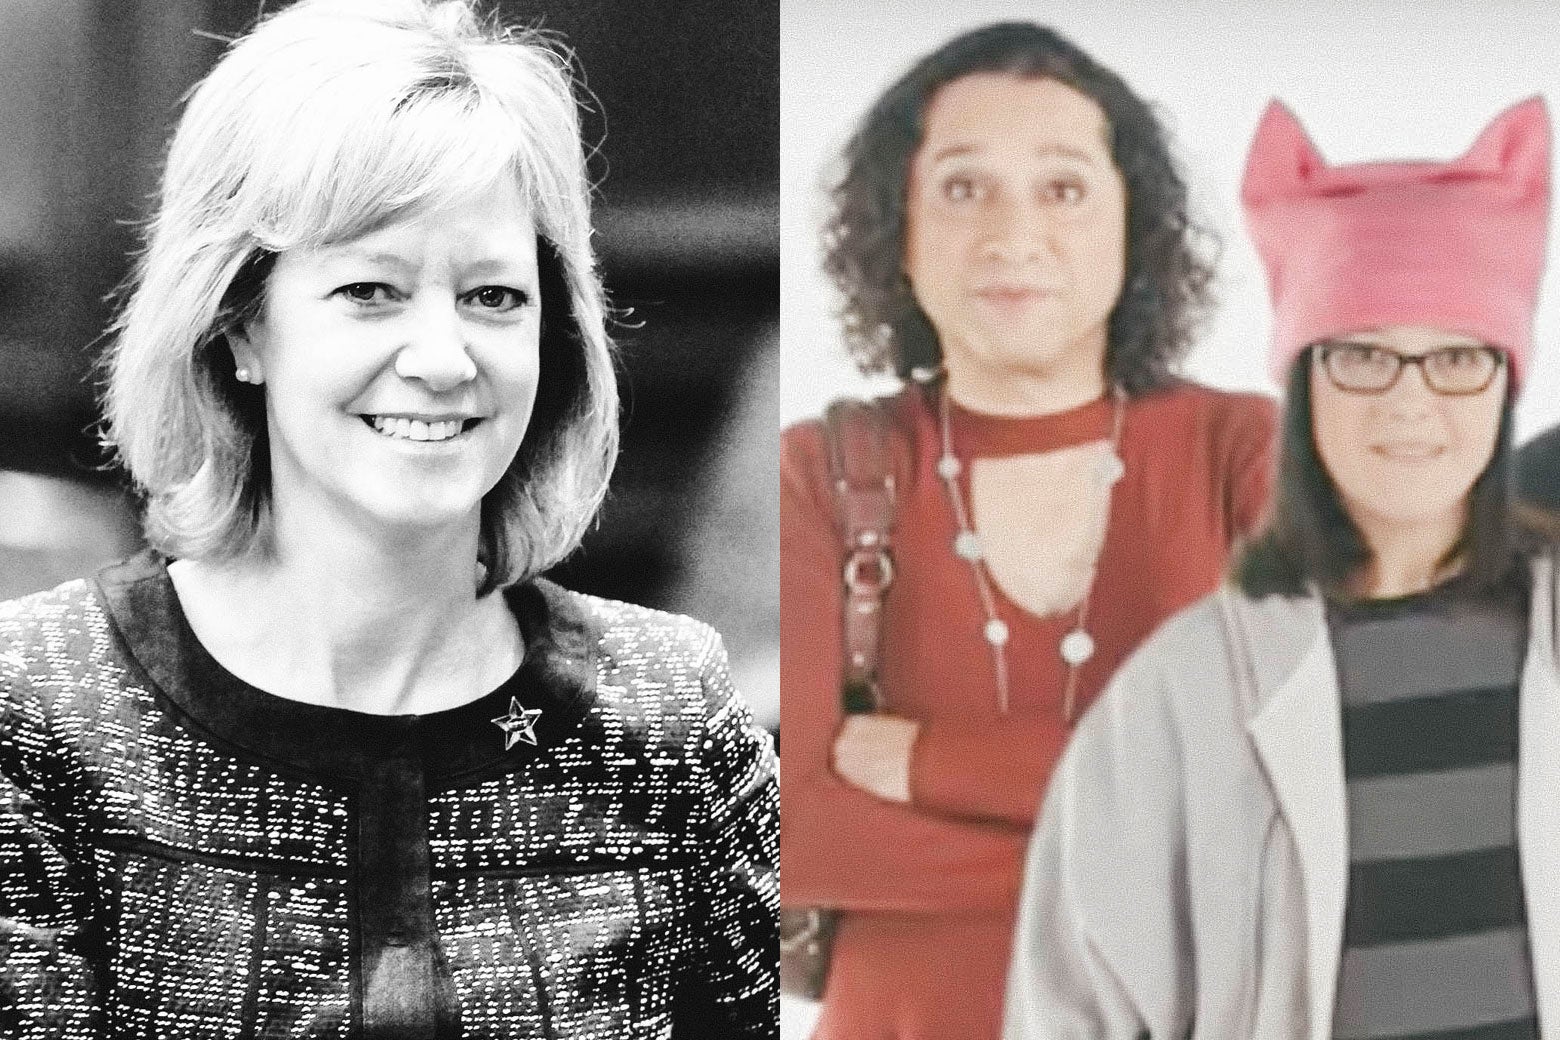 A split image with Rep. Jeanne Ives on the left and actors in her campaign ad on the right.